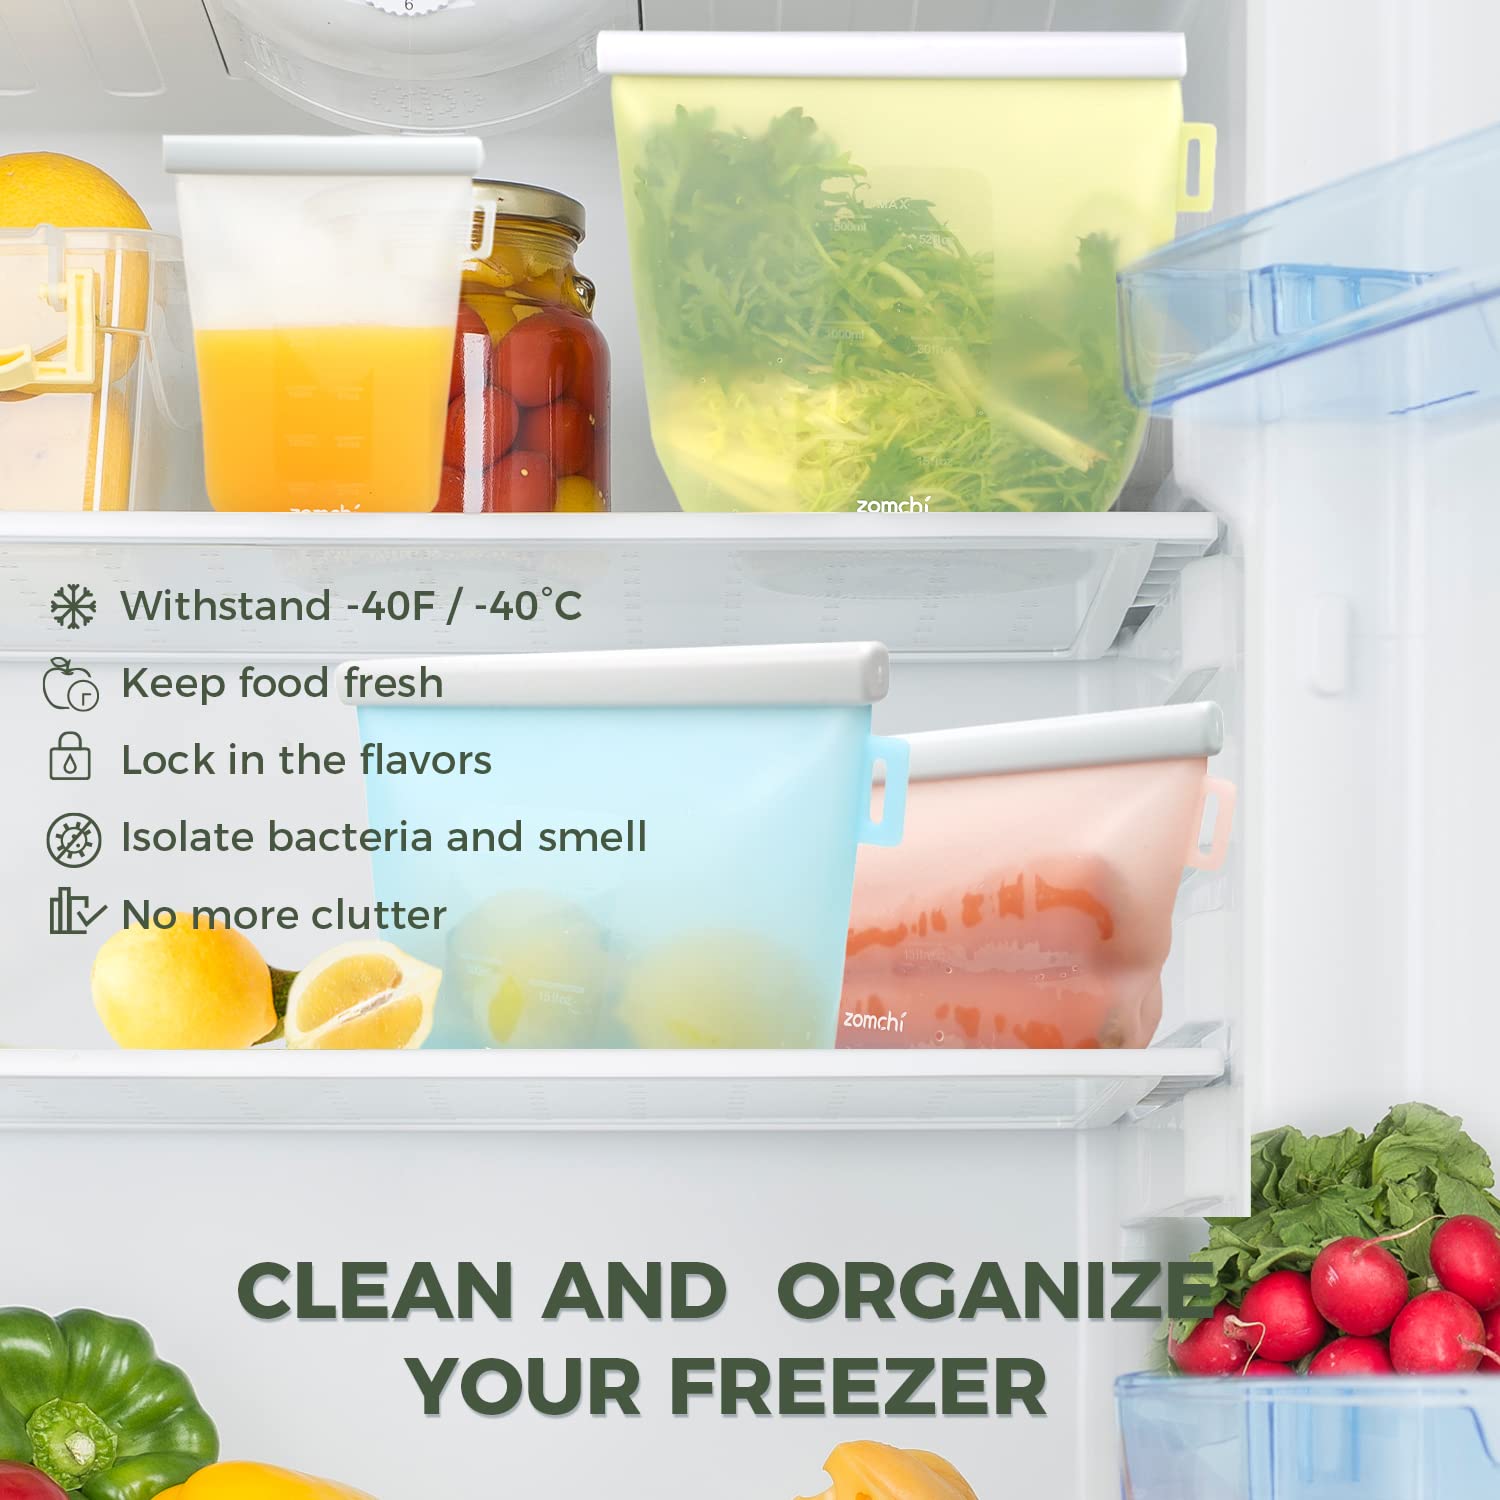 Use Zomchi Reusable Food Storage Bag To Sclean And Organize Your Freezer